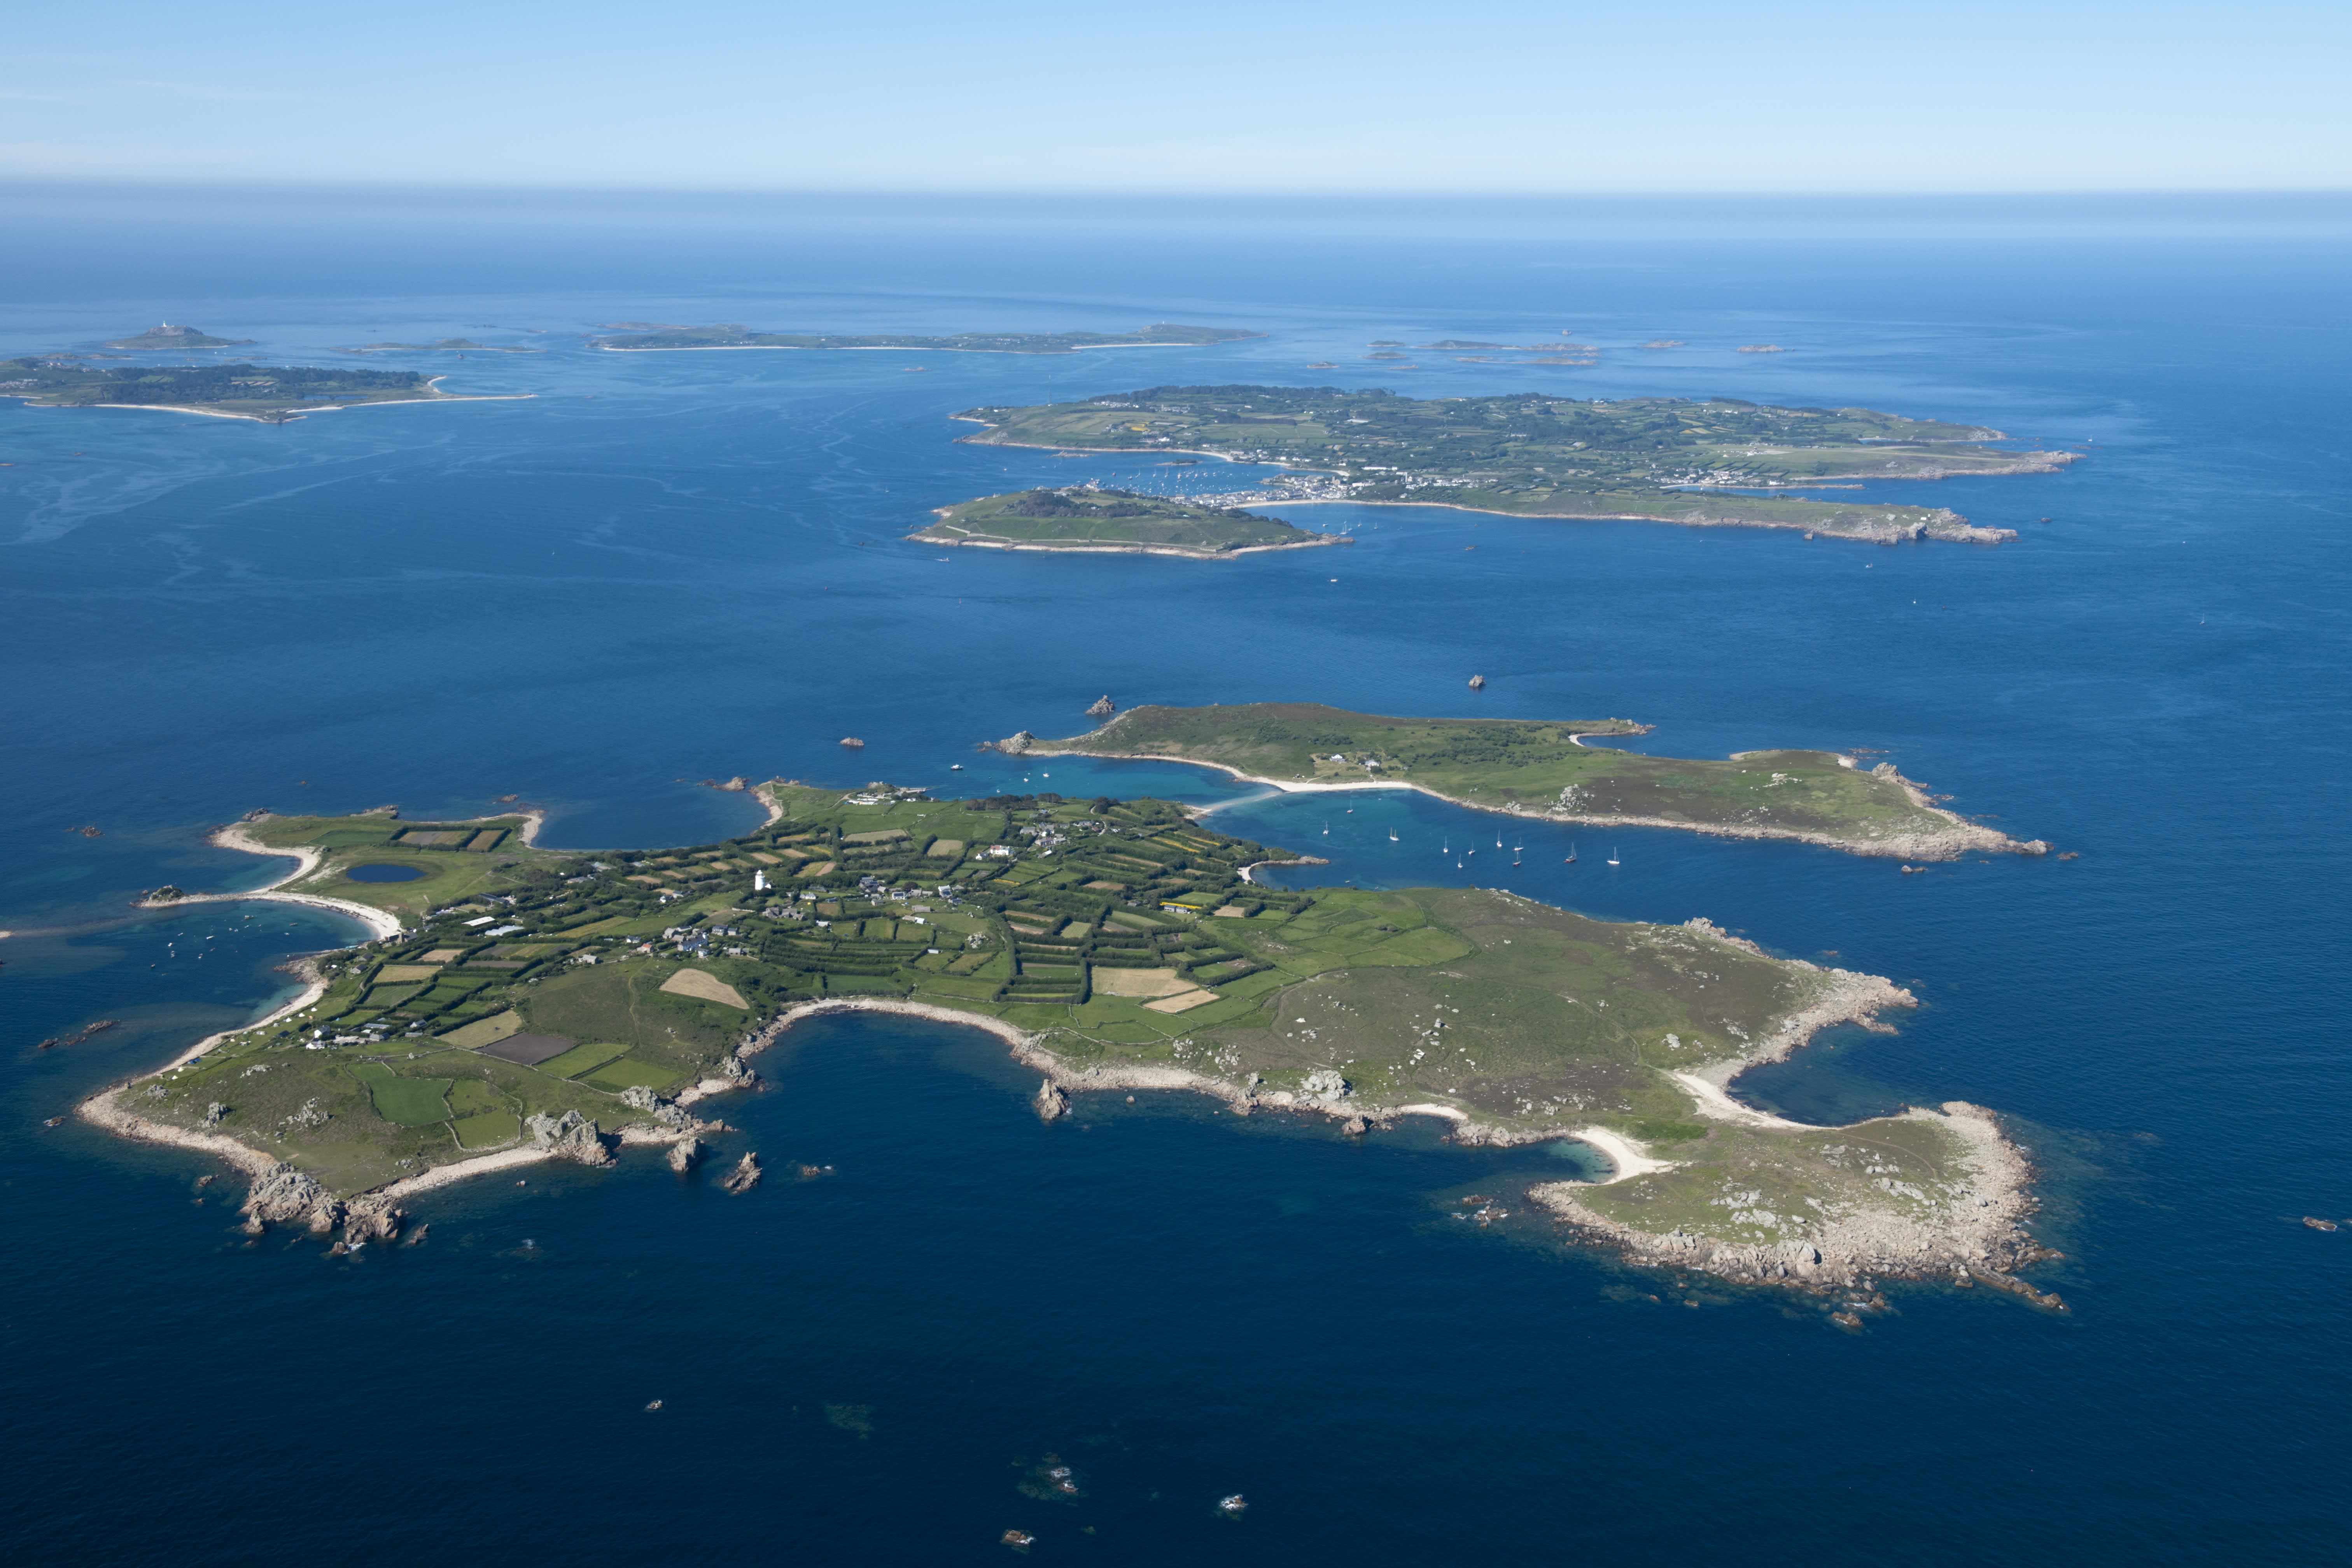 Archipelago to explore the potential of waves, tides, floating wind energy